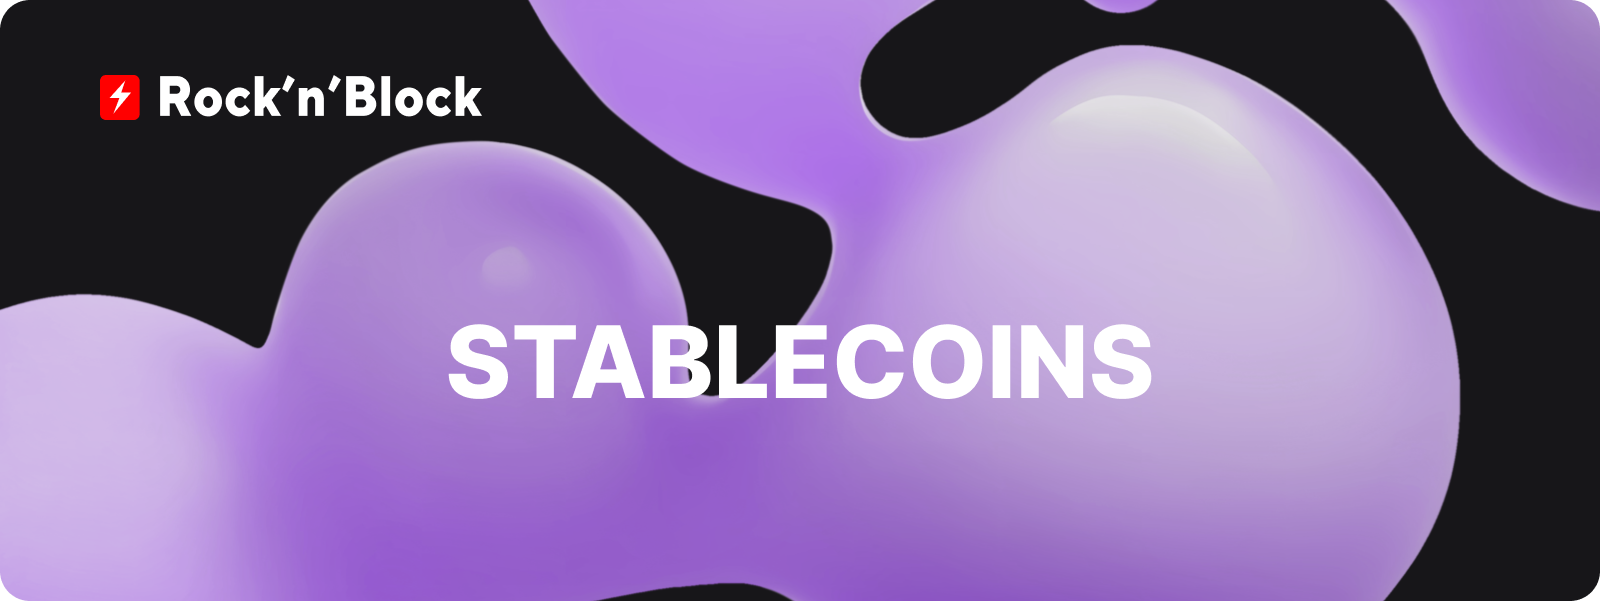 Stablecoins are cryptocurrencies designed to maintain a stable value, often pegged to a fiat currency like the US dollar or other real world assets. These digital assets offer a reliable store of value and a medium of exchange in the often turbulent cryptocurrency market. They are a fundamental building block of DeFi projects.